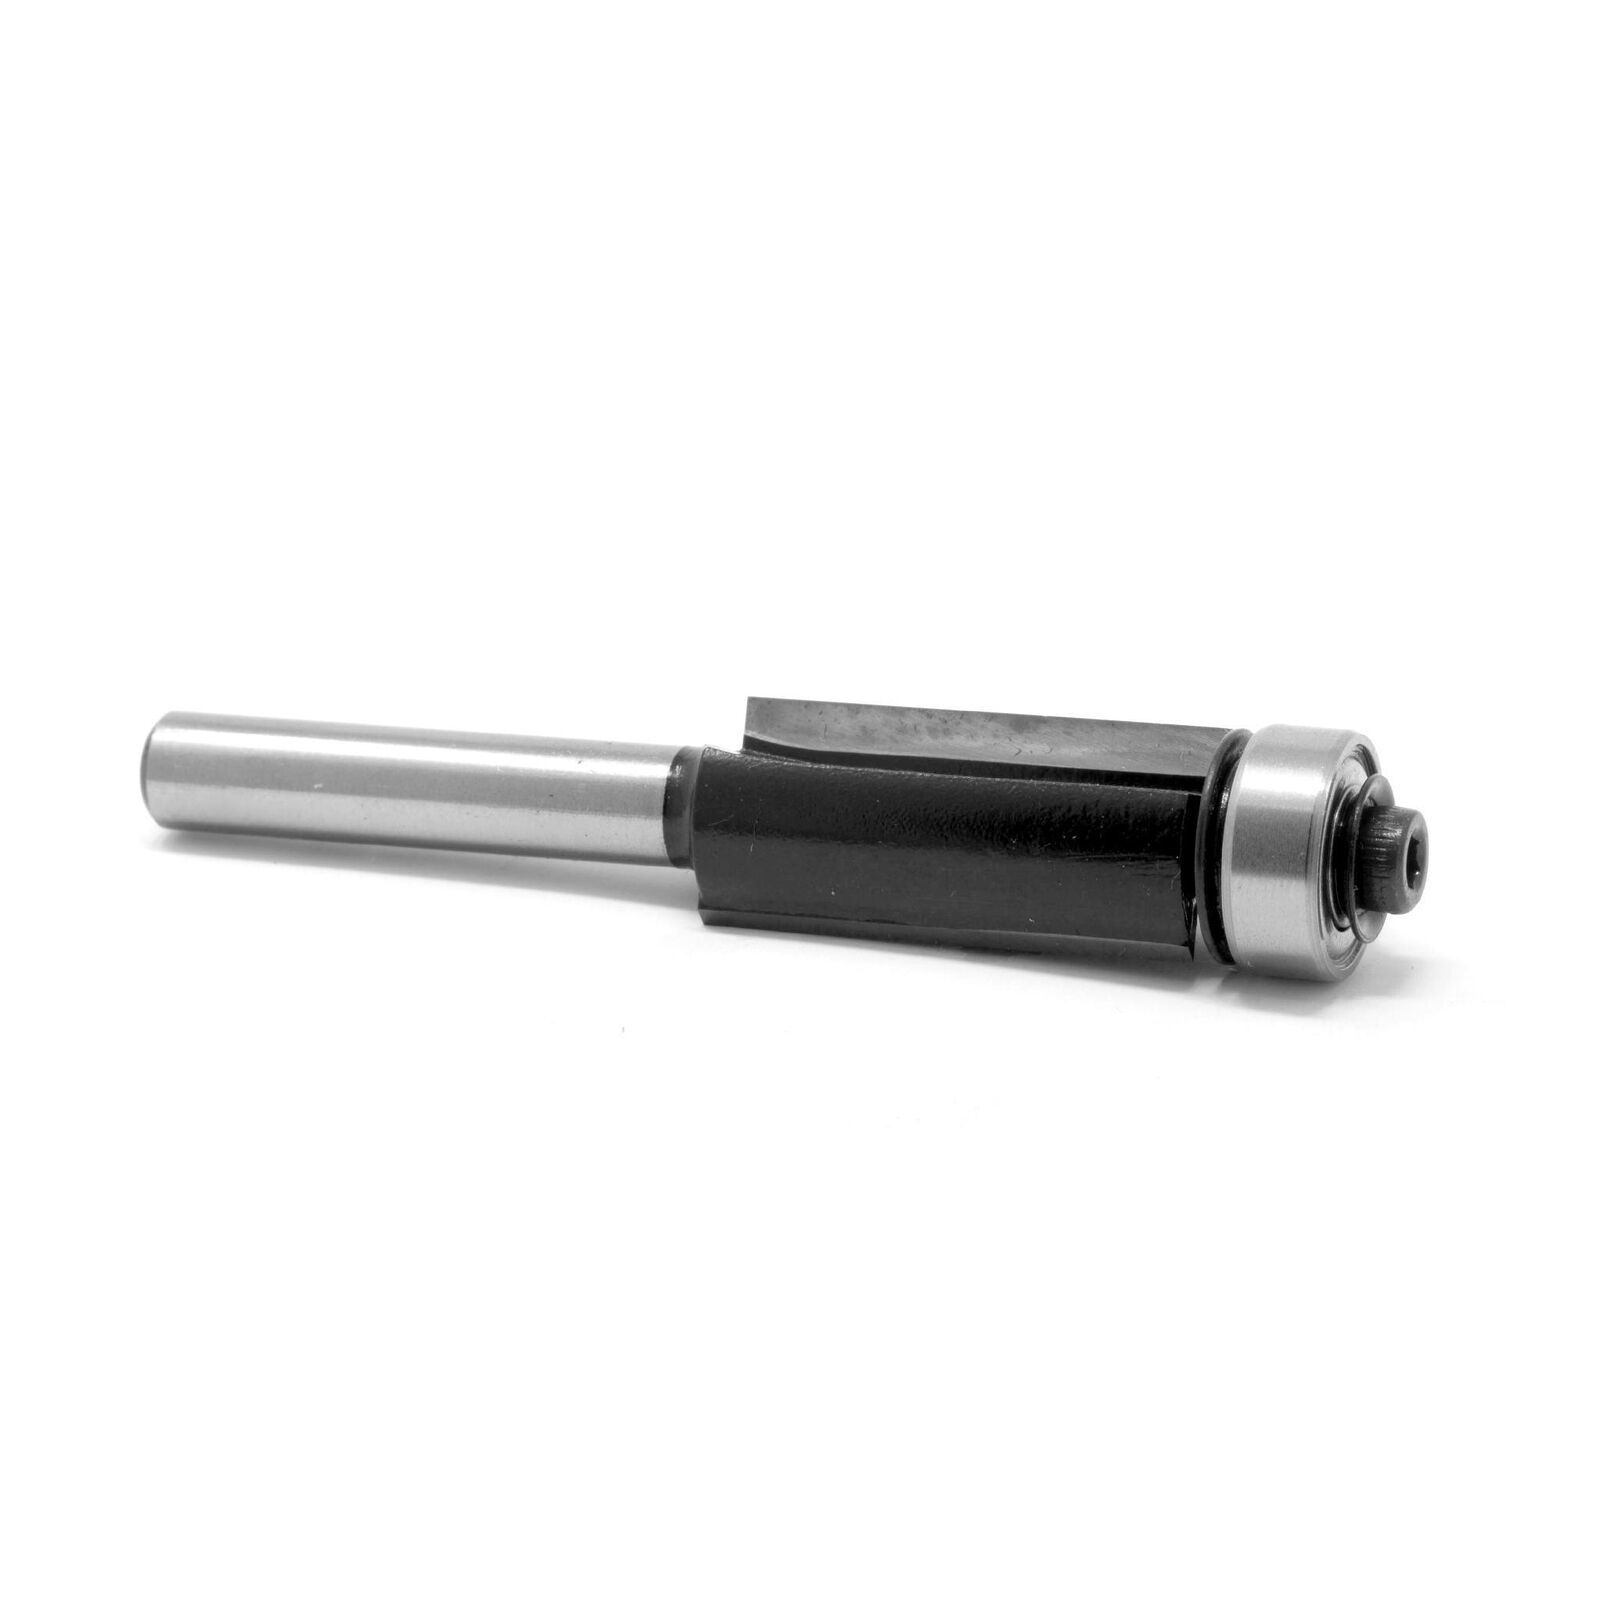 WEN RB404FT 1/2 in. Flush Trim Router Bit, 1/4 in. Shank and 1 in. Length - $28.49